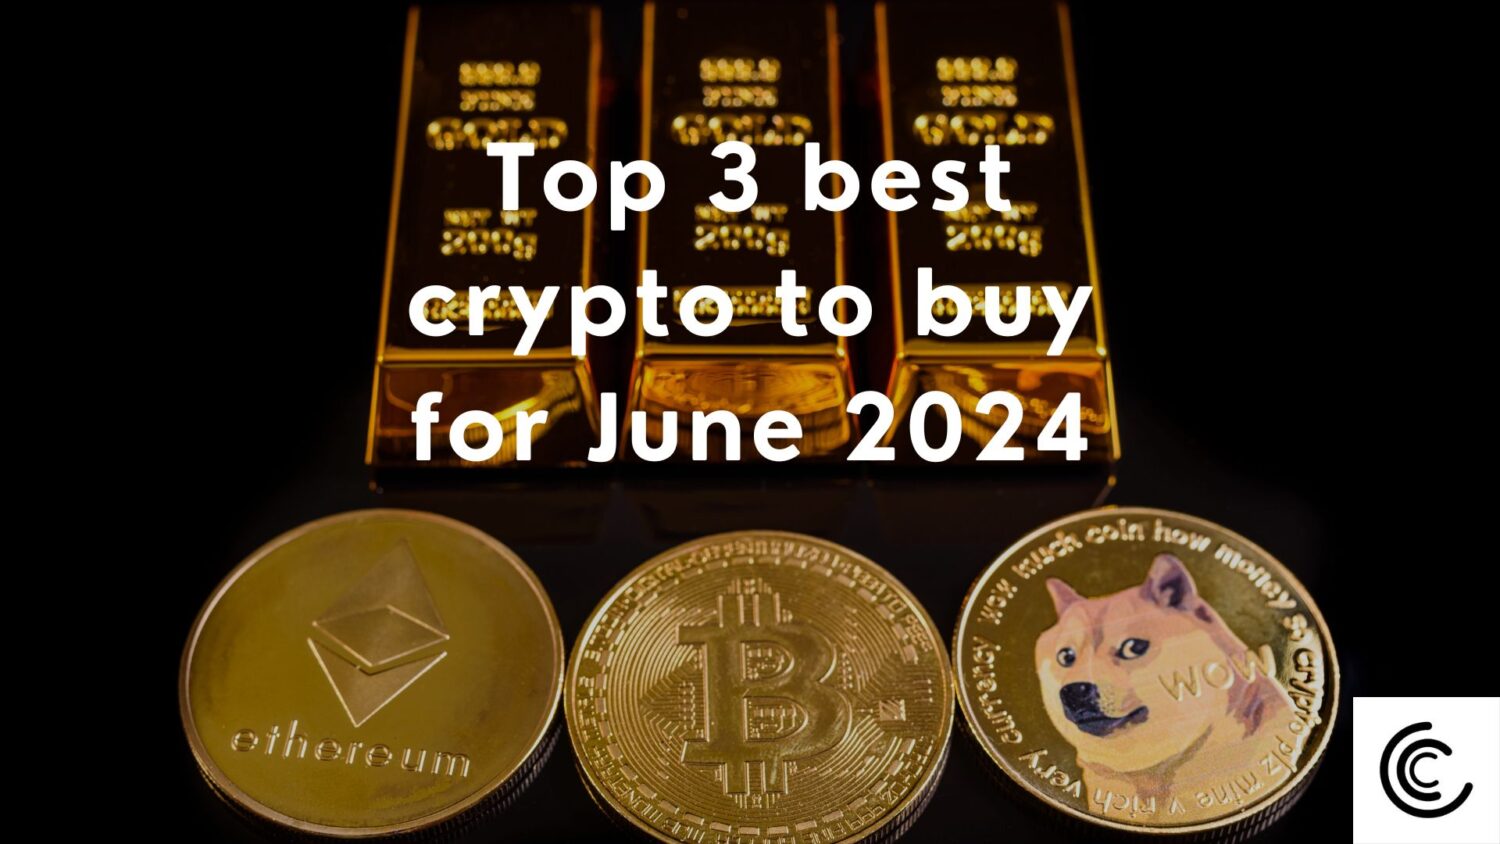 Top 3 Best Cryptos To Buy For June 2024